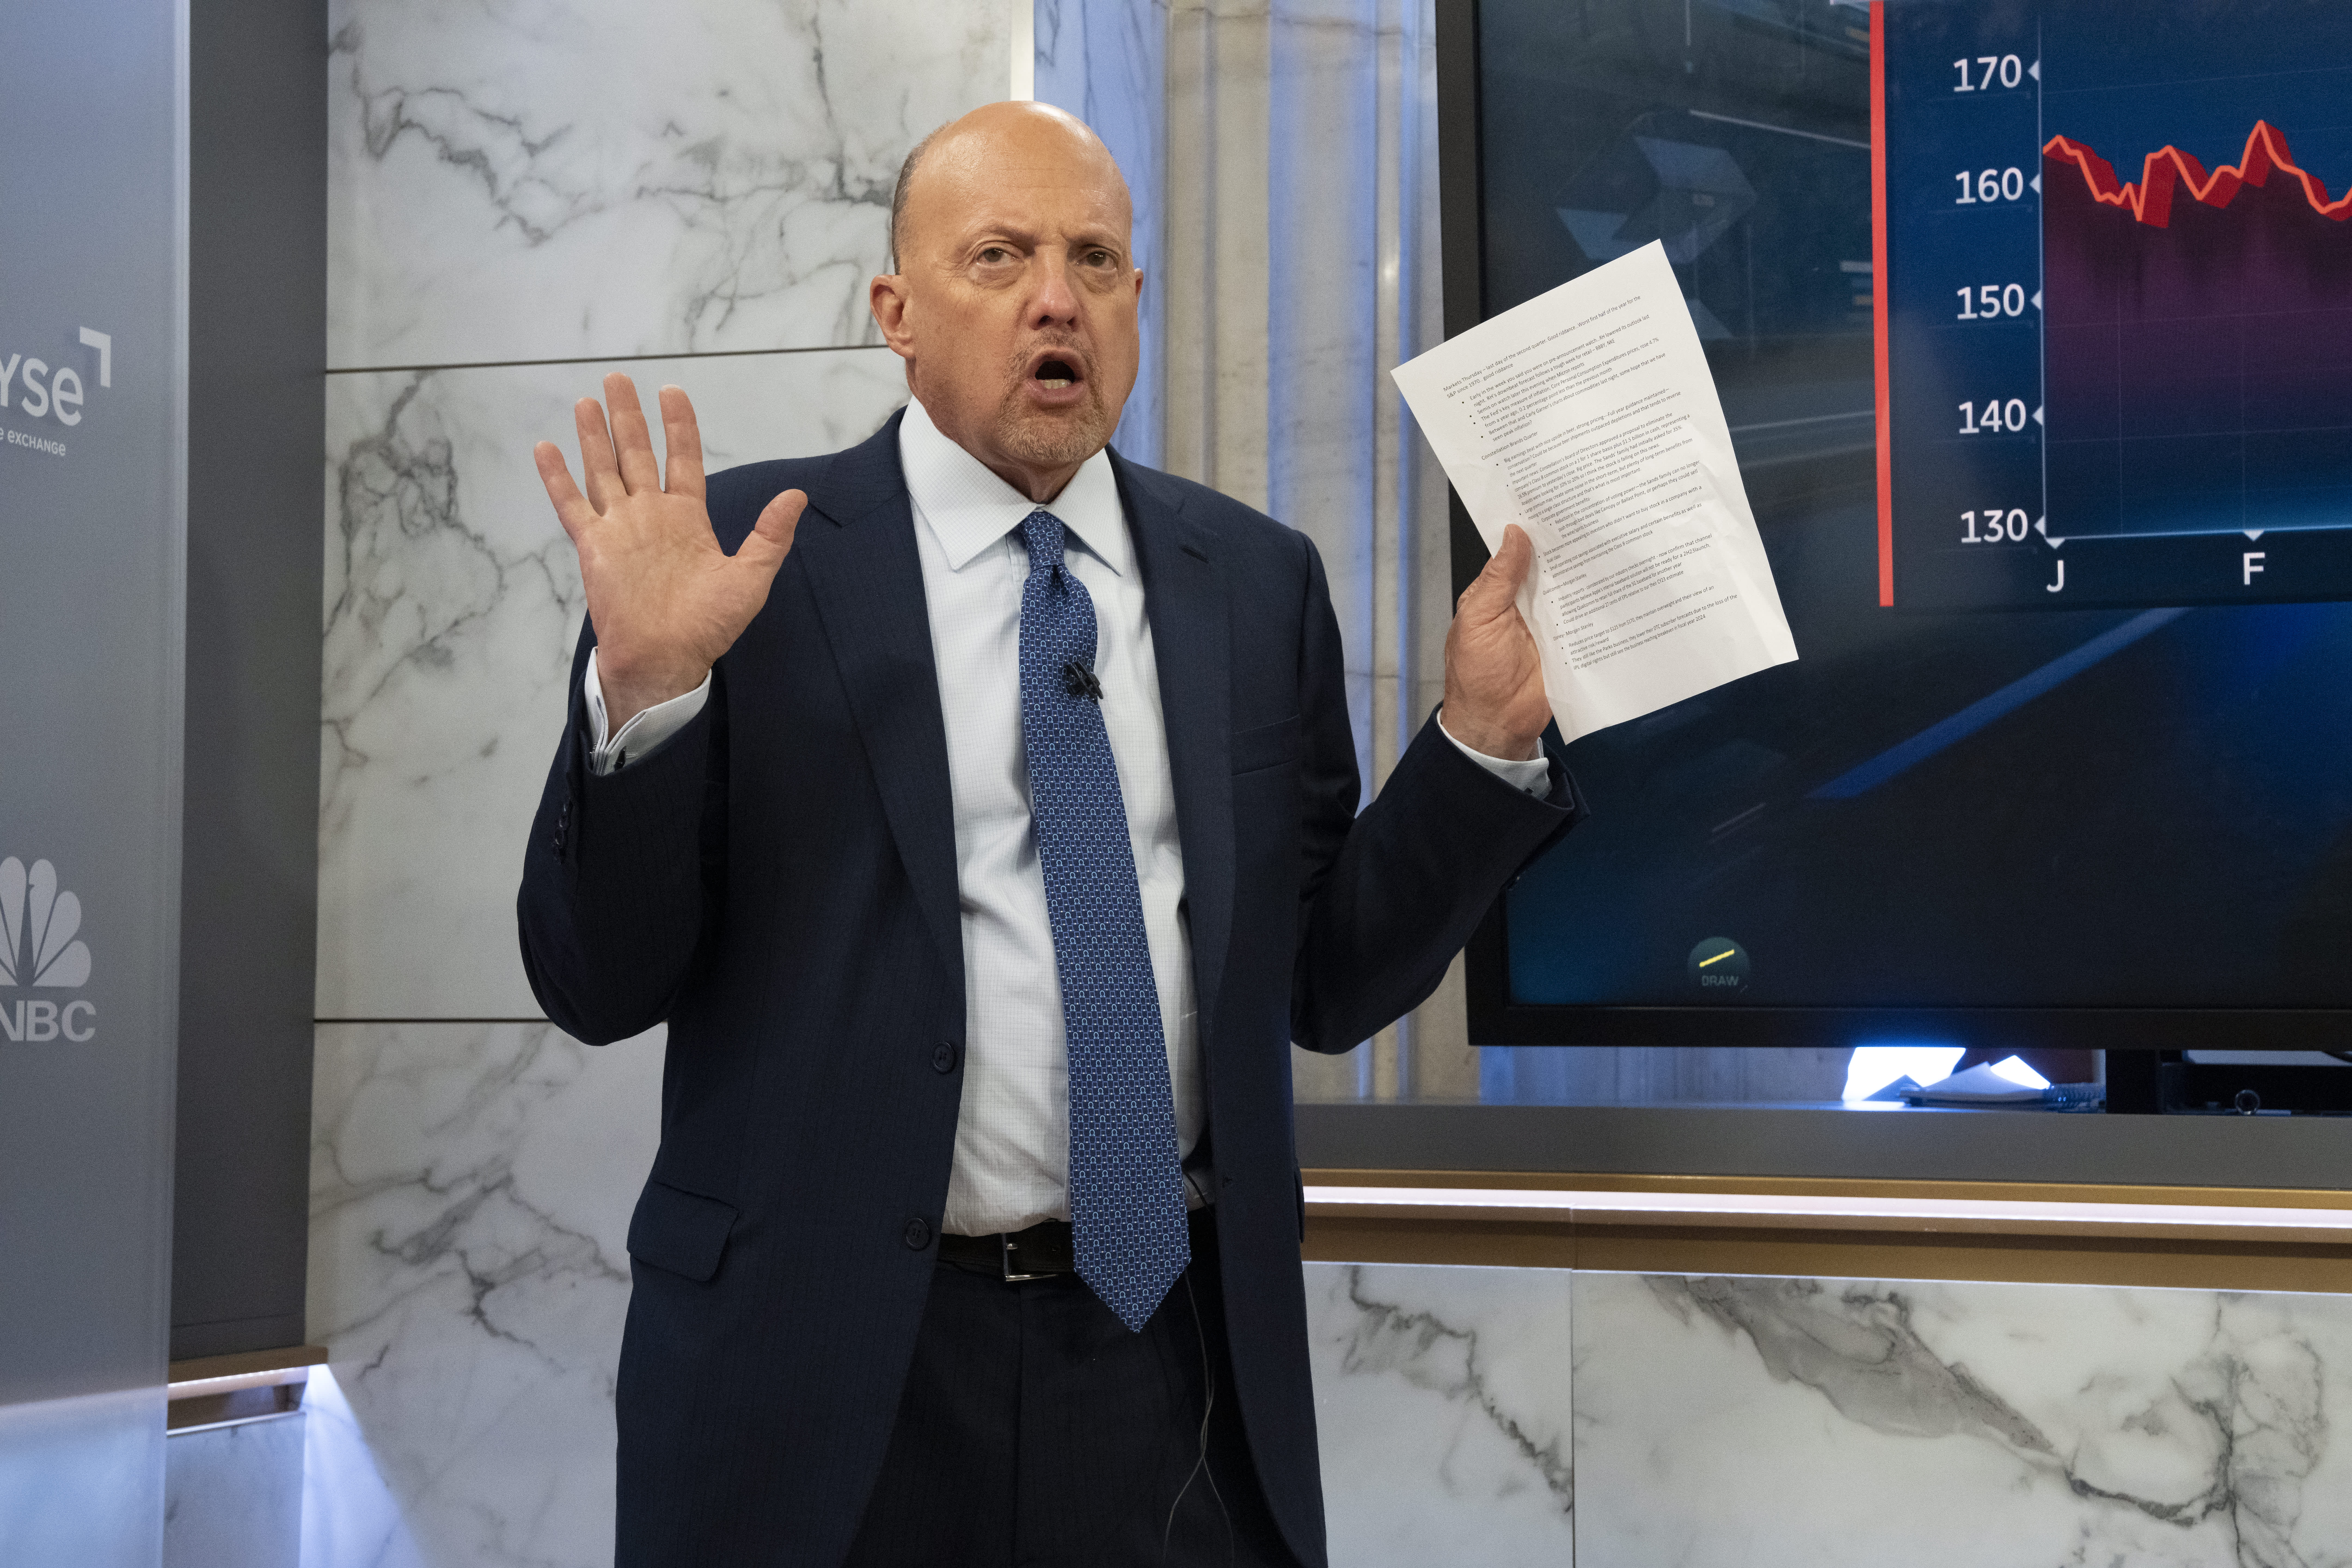 Jim Cramer's Investment Club Friday Meeting: Hot Jobs Report, Marvell Earnings Readthrough